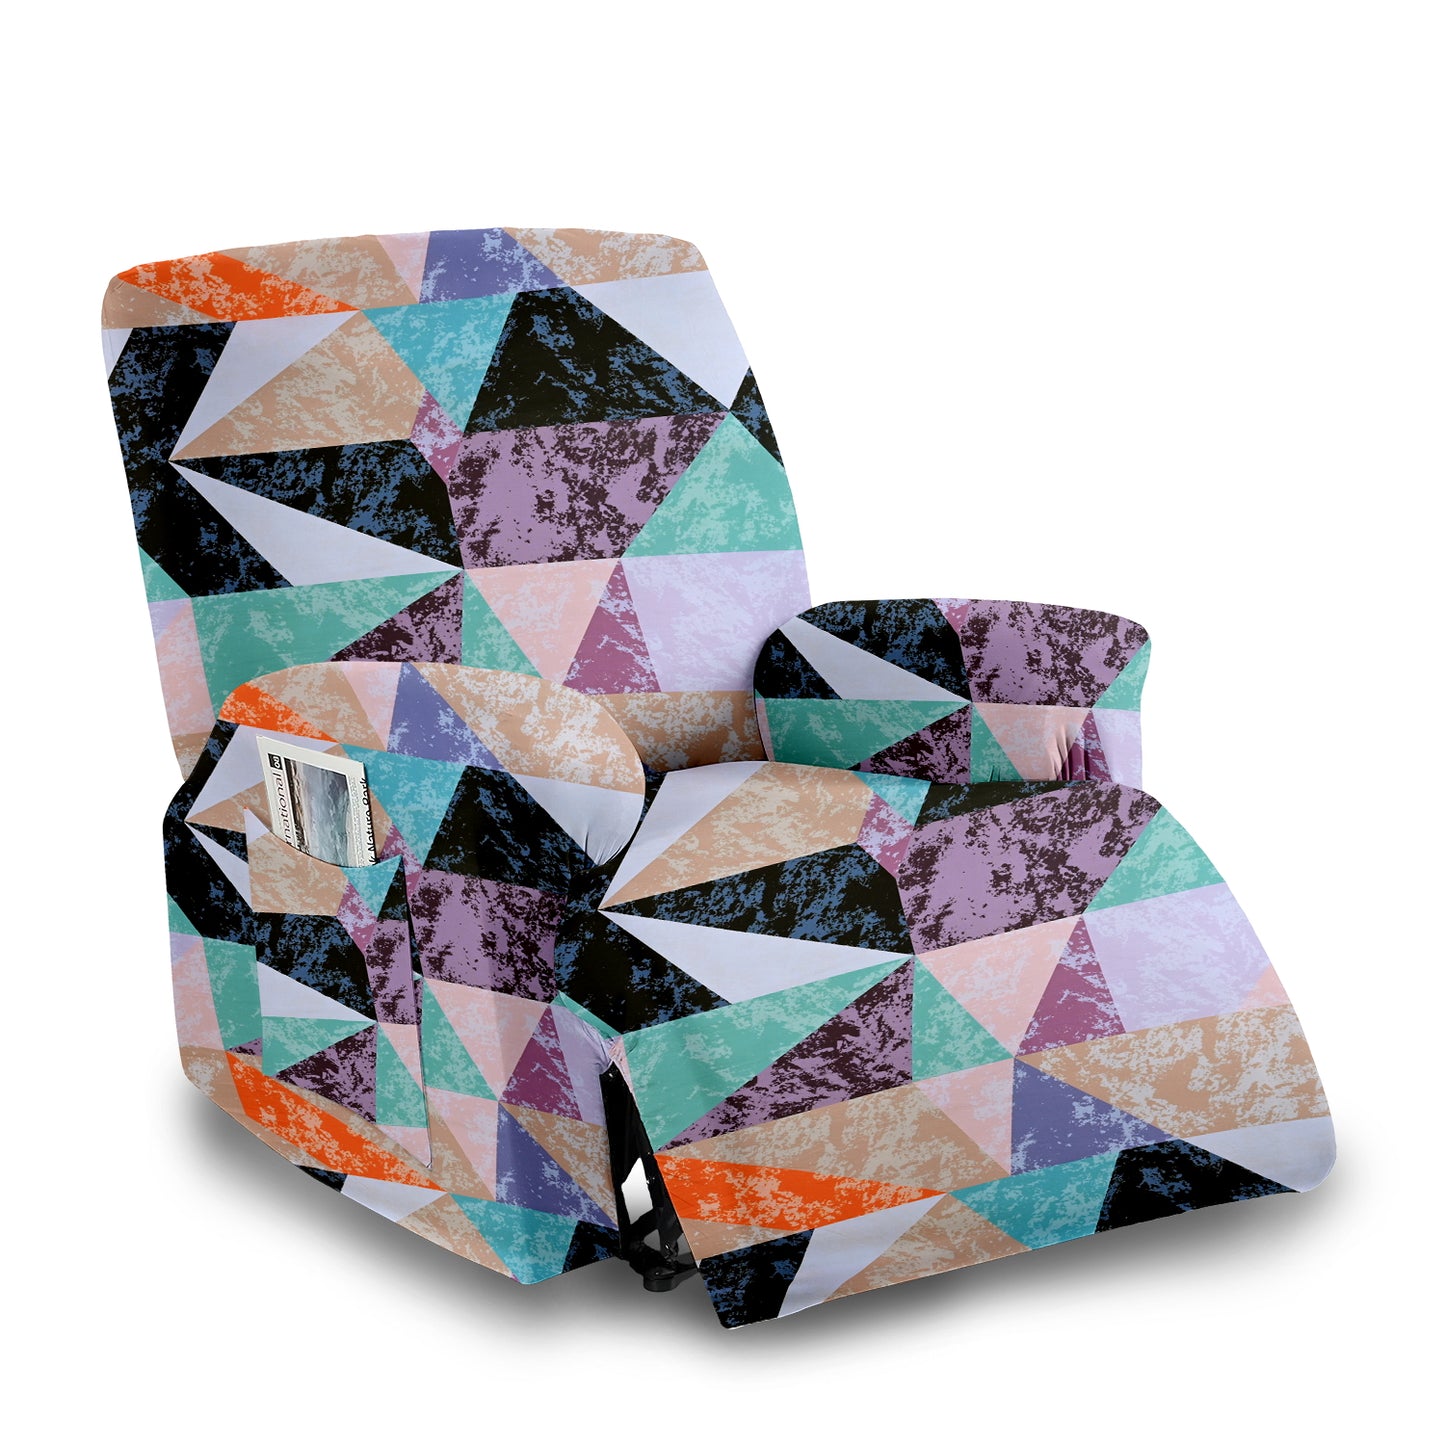 Stretchable Polyester Printed Recliner Cover